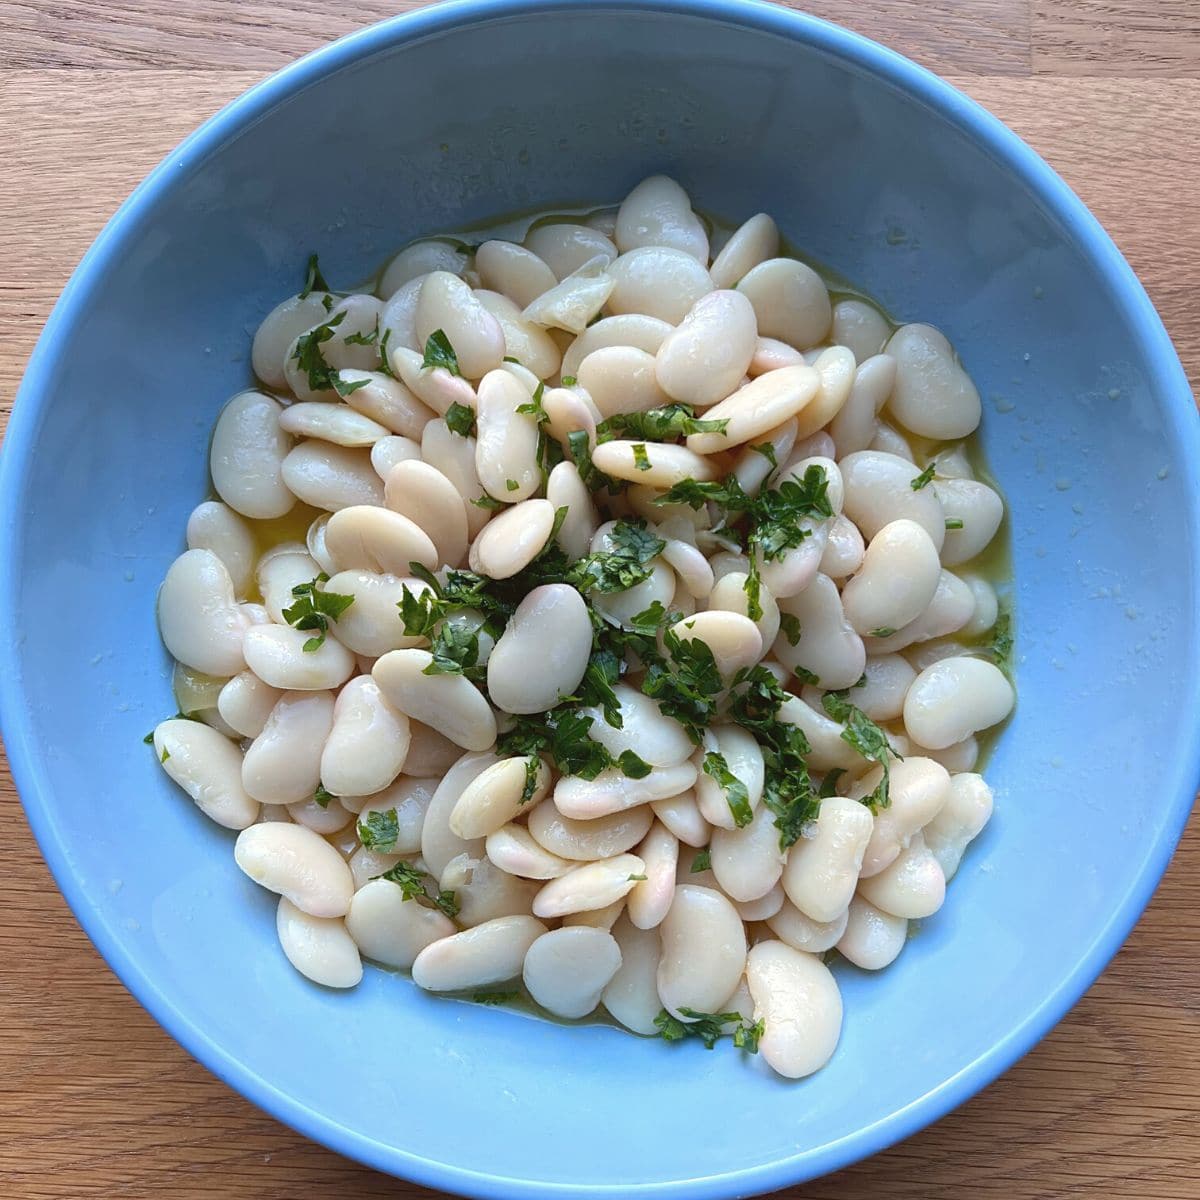 Butter beans and parsley in blue bowl.